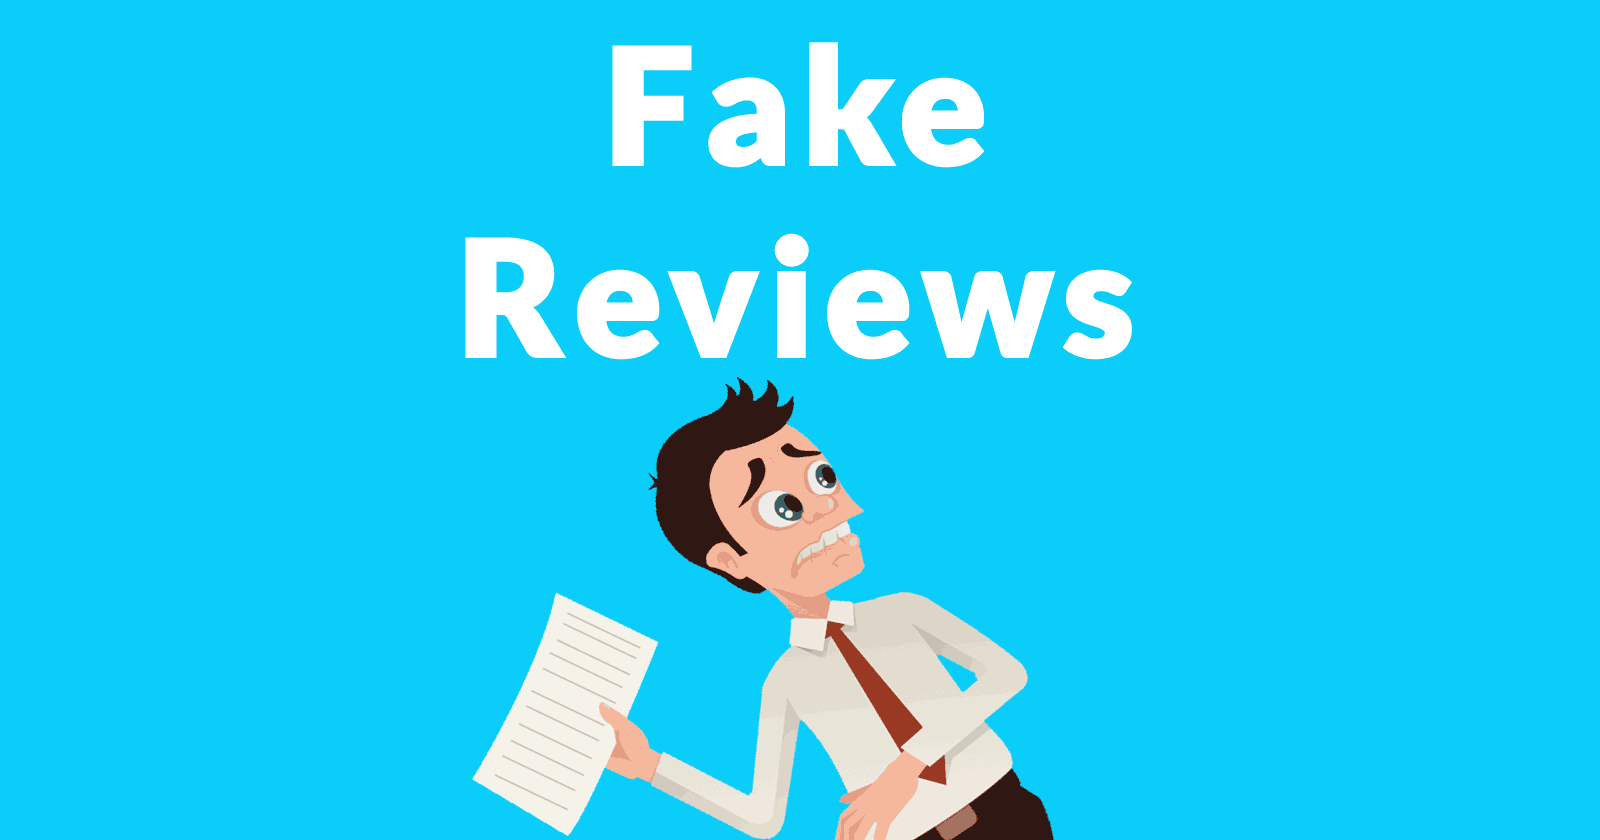 FTC Crackdown on Fake Review Site